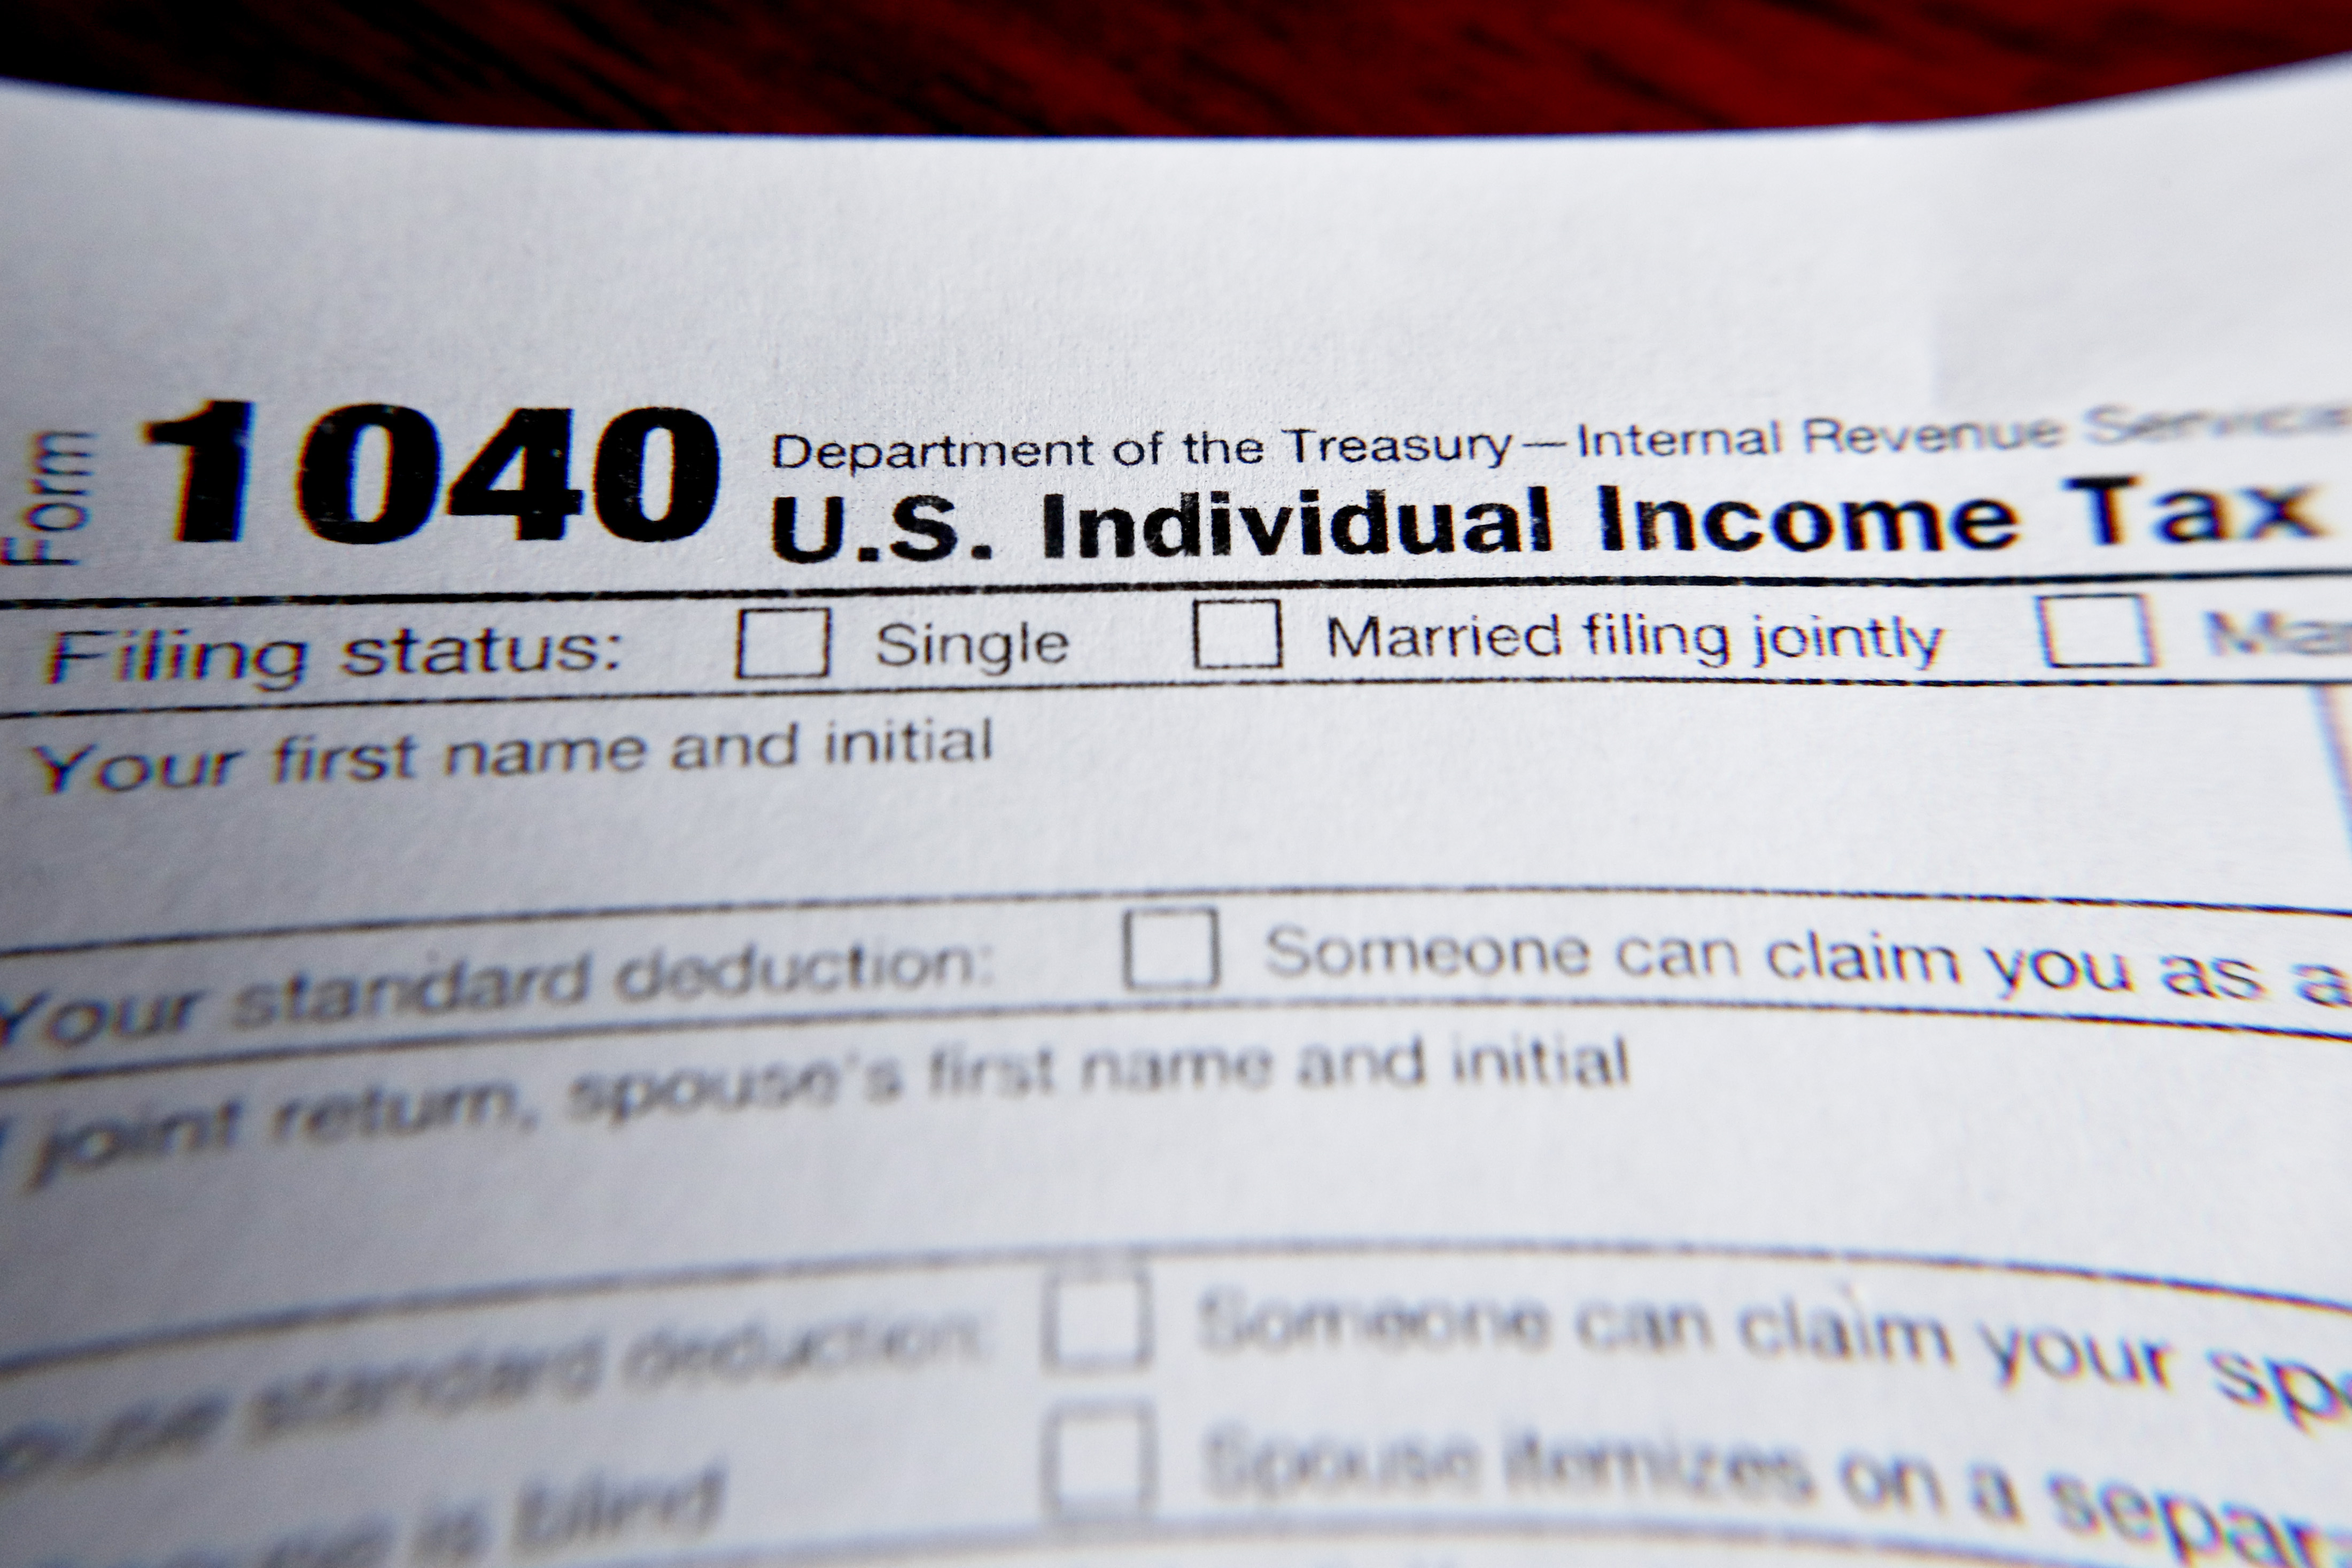 City Of Dayton Offering Tax Help To Income Tax Customers